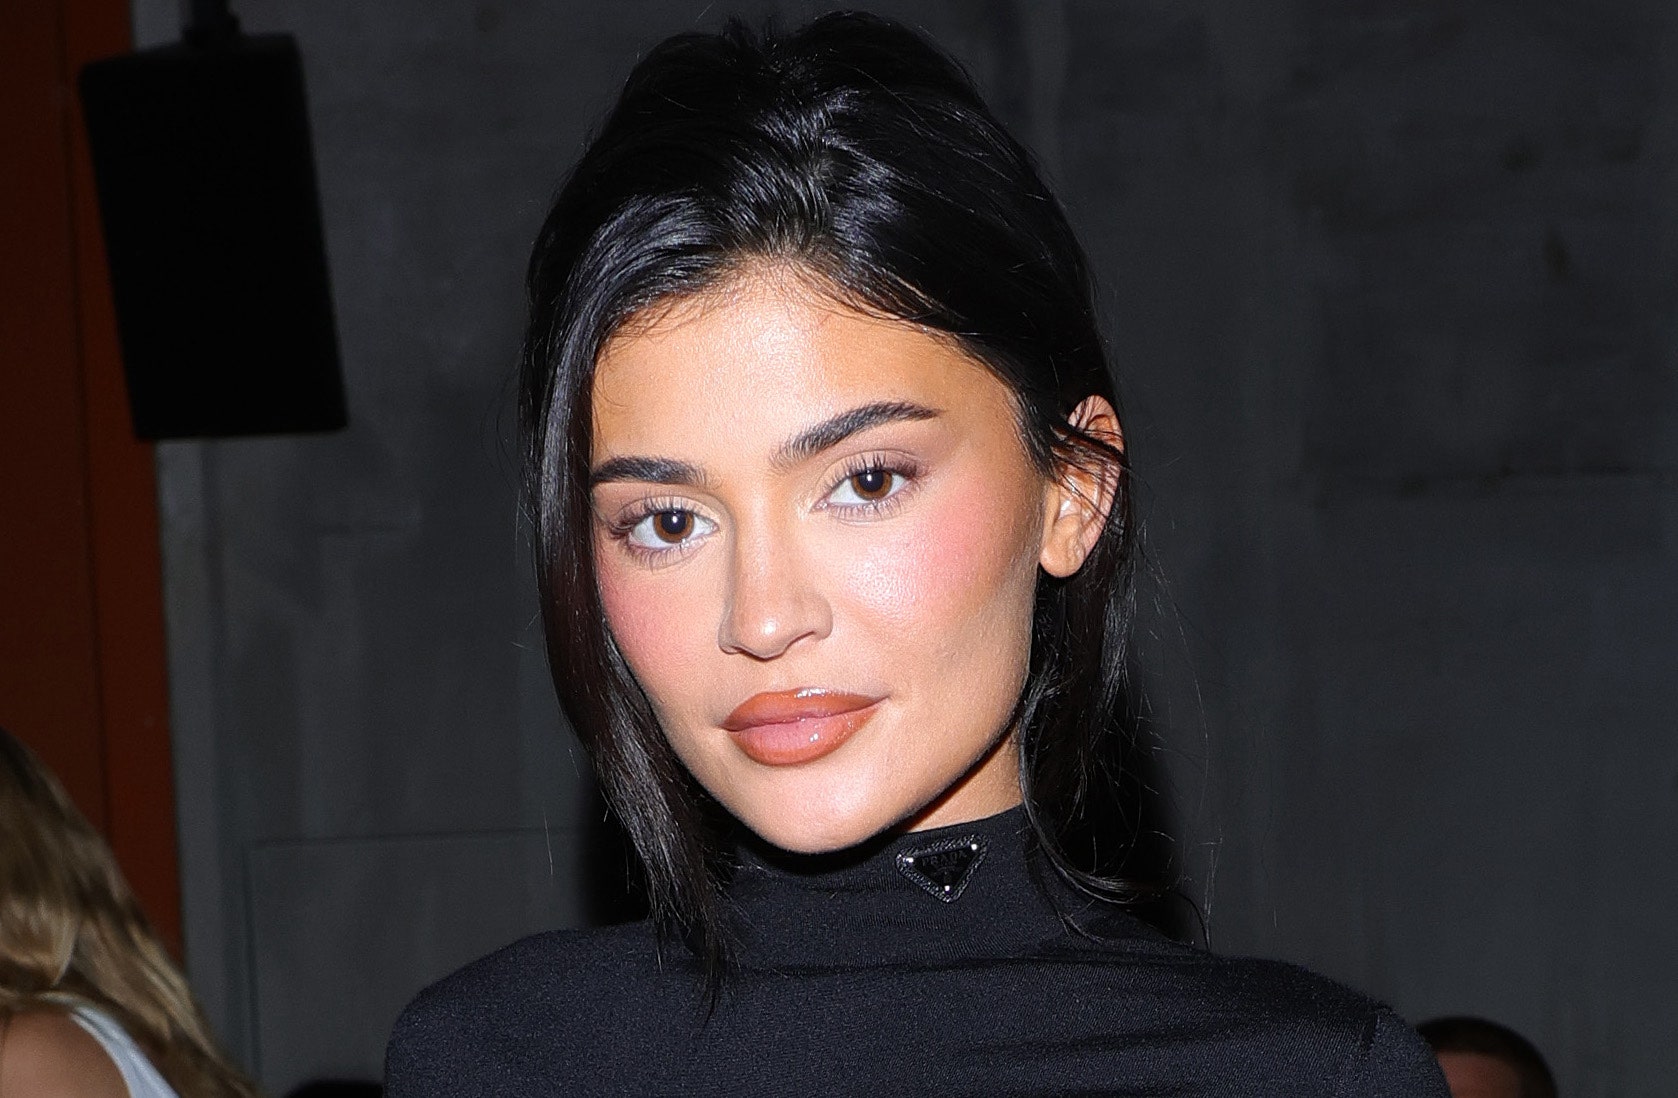 Kylie Jenner Zodiac Sign: What is Kylie Jenner’s Star Sign?